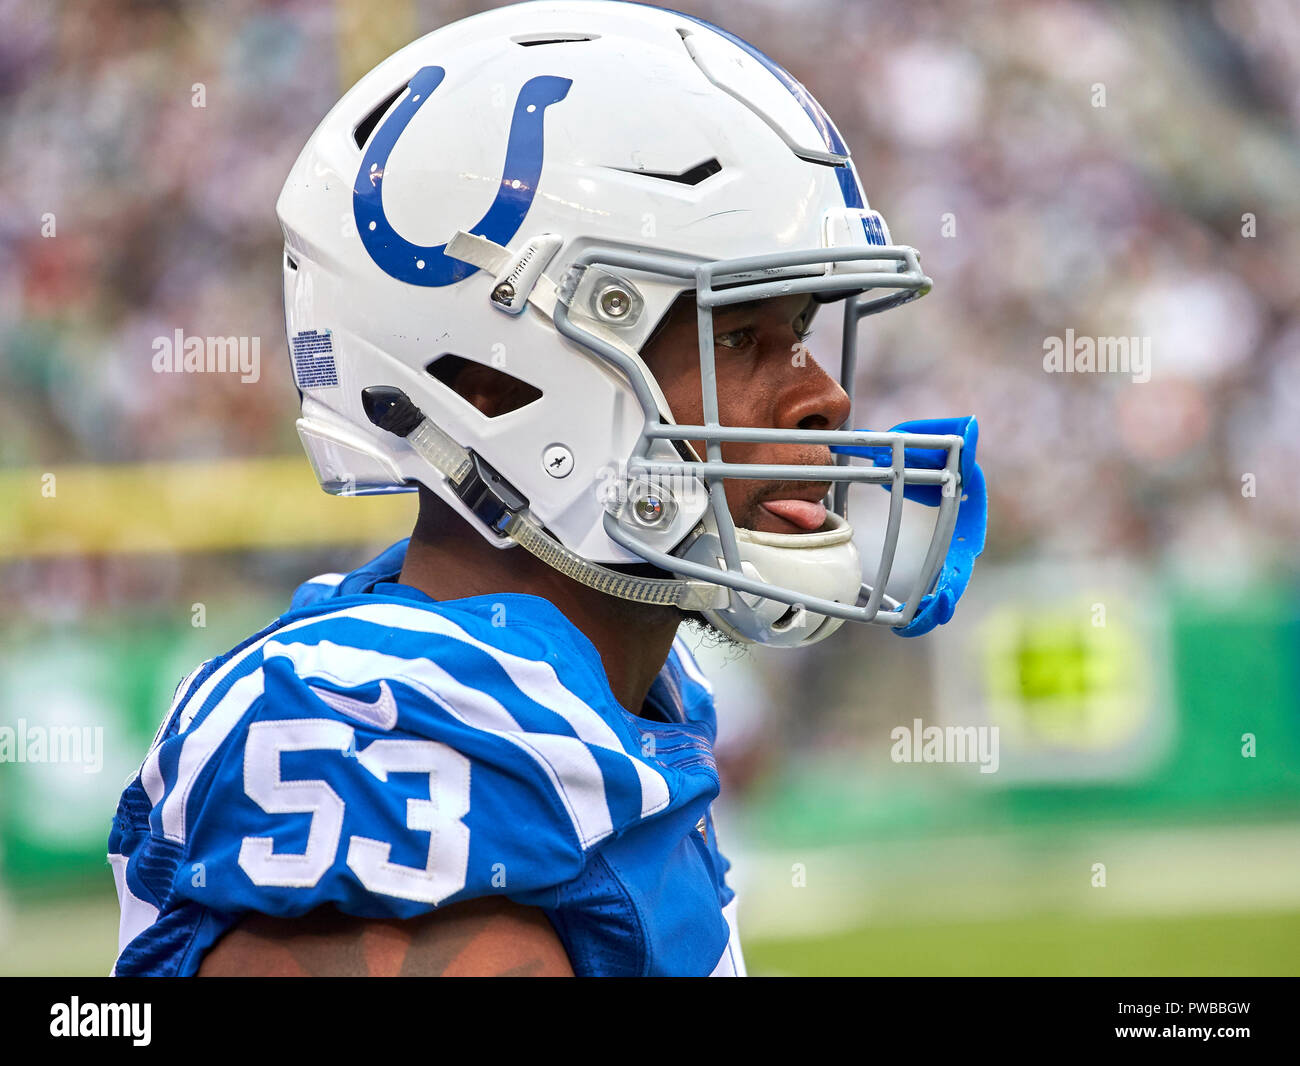 East Rutherford, New Jersey, USA. 14th Oct, 2018. Indianapolis Colts linebacker Darius Leonard (53) during a NFL game between the Indianapolis Colts and the New York Jets at MetLife Stadium in East Rutherford, New Jersey. The Jets defeated the Colts 42-34. Duncan Williams/CSM/Alamy Live News Stock Photo